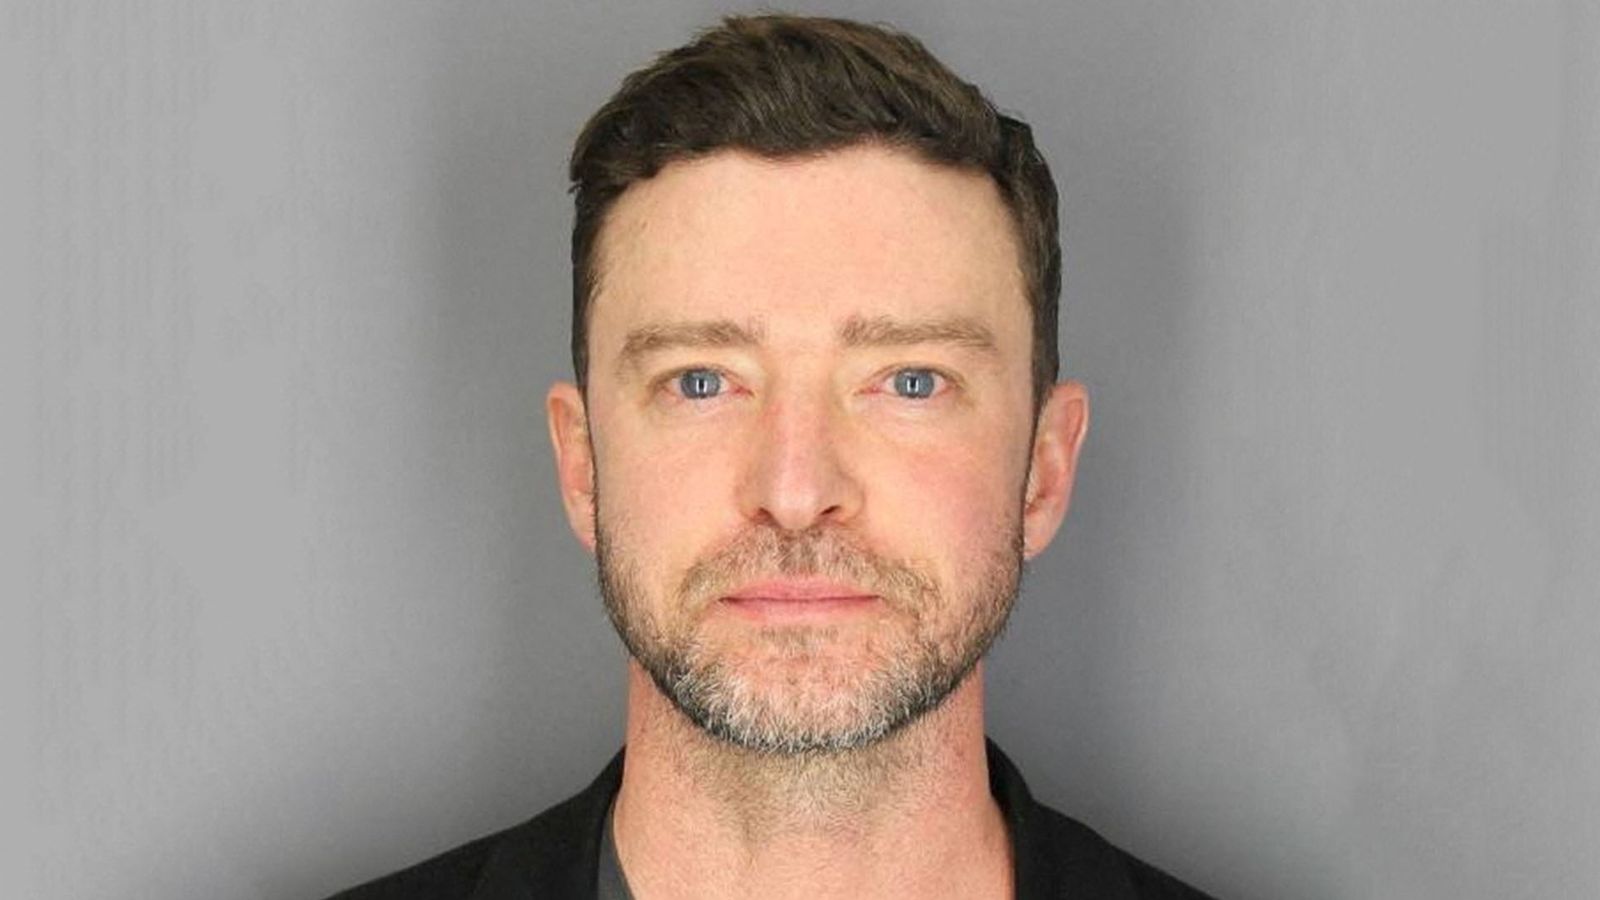 'This is going to ruin the tour': New details emerge of Justin Timberlake drink-driving arrest